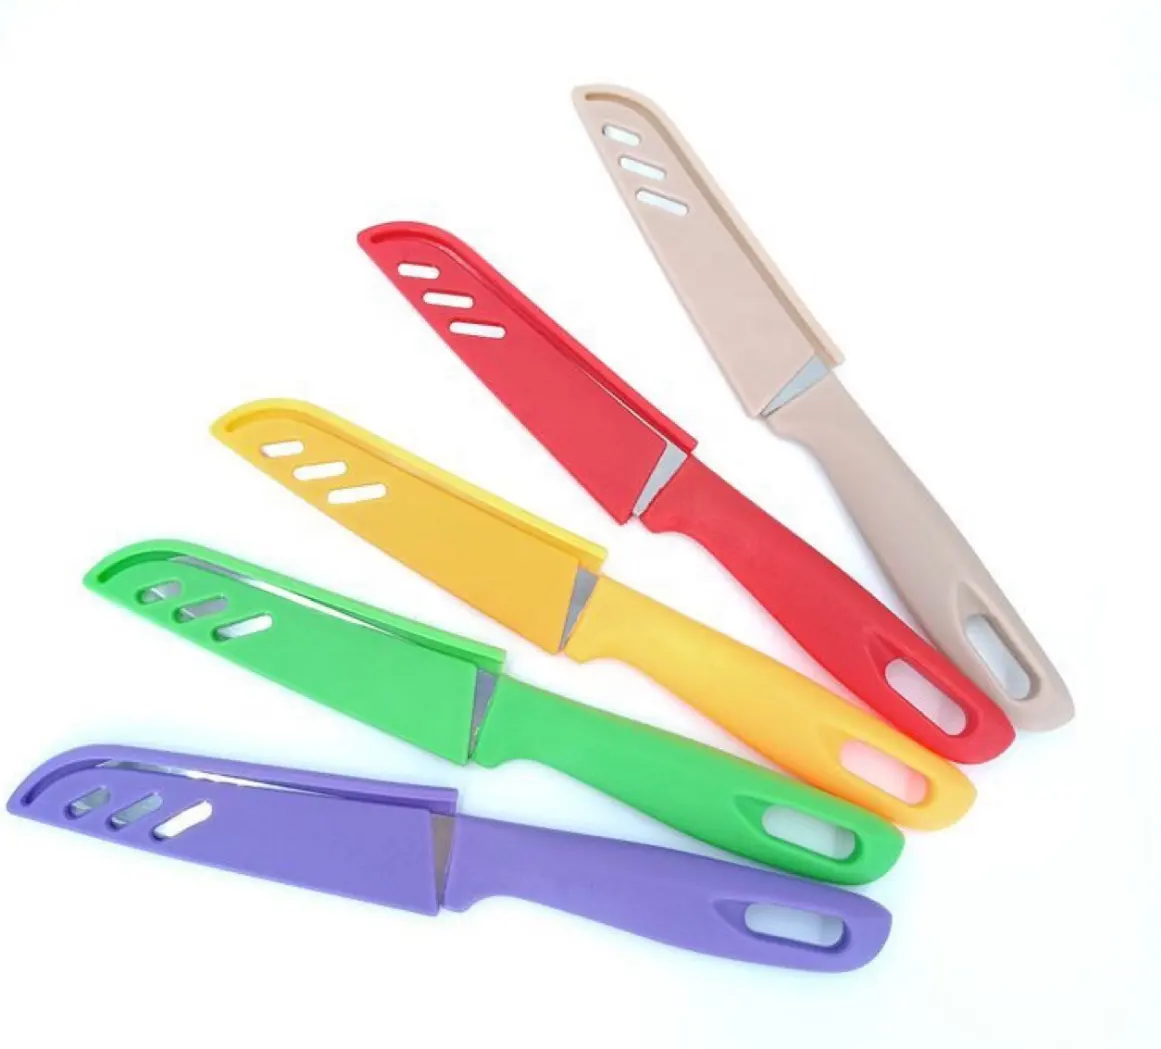 Hot Sale Kitchen Cutting Knife Candy Colors Stainless Steel Fruit Knife With Plastic Handle